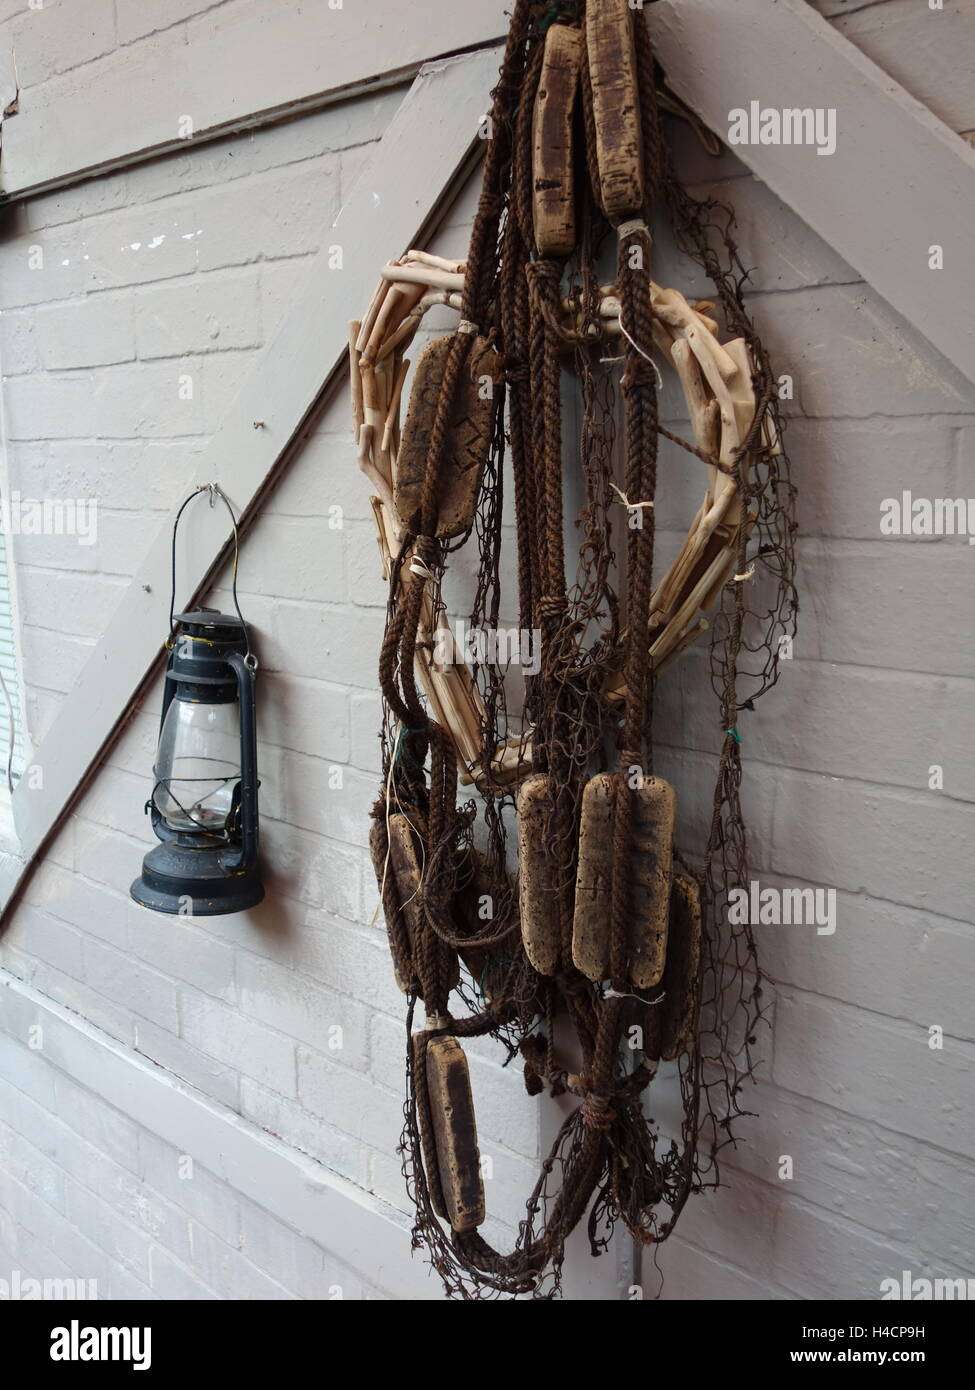 An old fishing net hanging next to a lamp on an old wall. Stock Photo